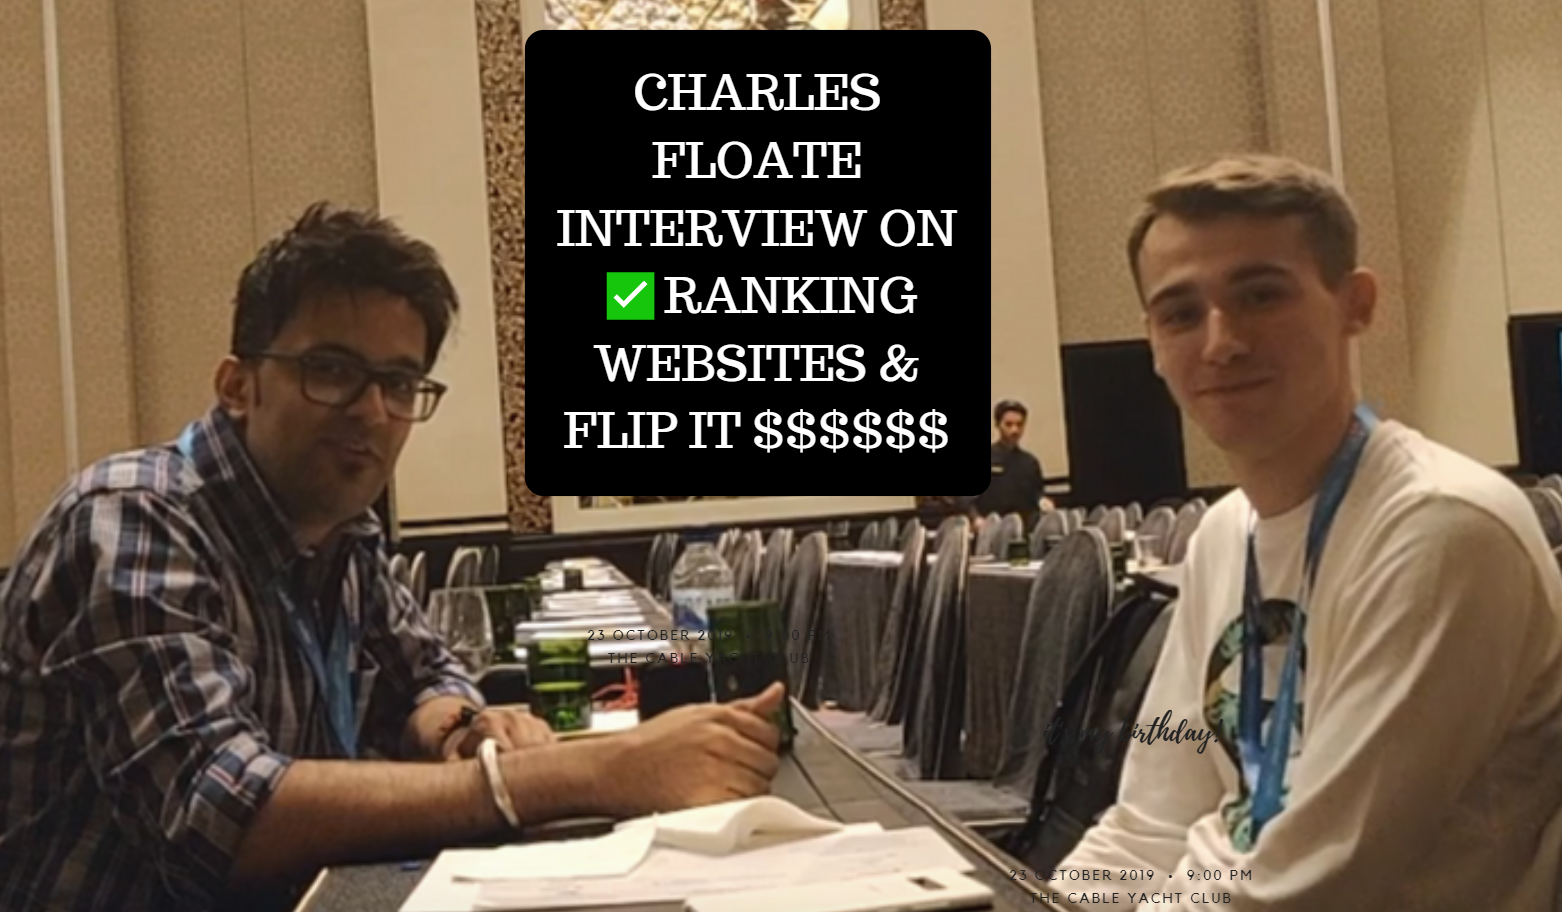 Charles Floate Interview How To Rank Websites & Flip It $$$$$